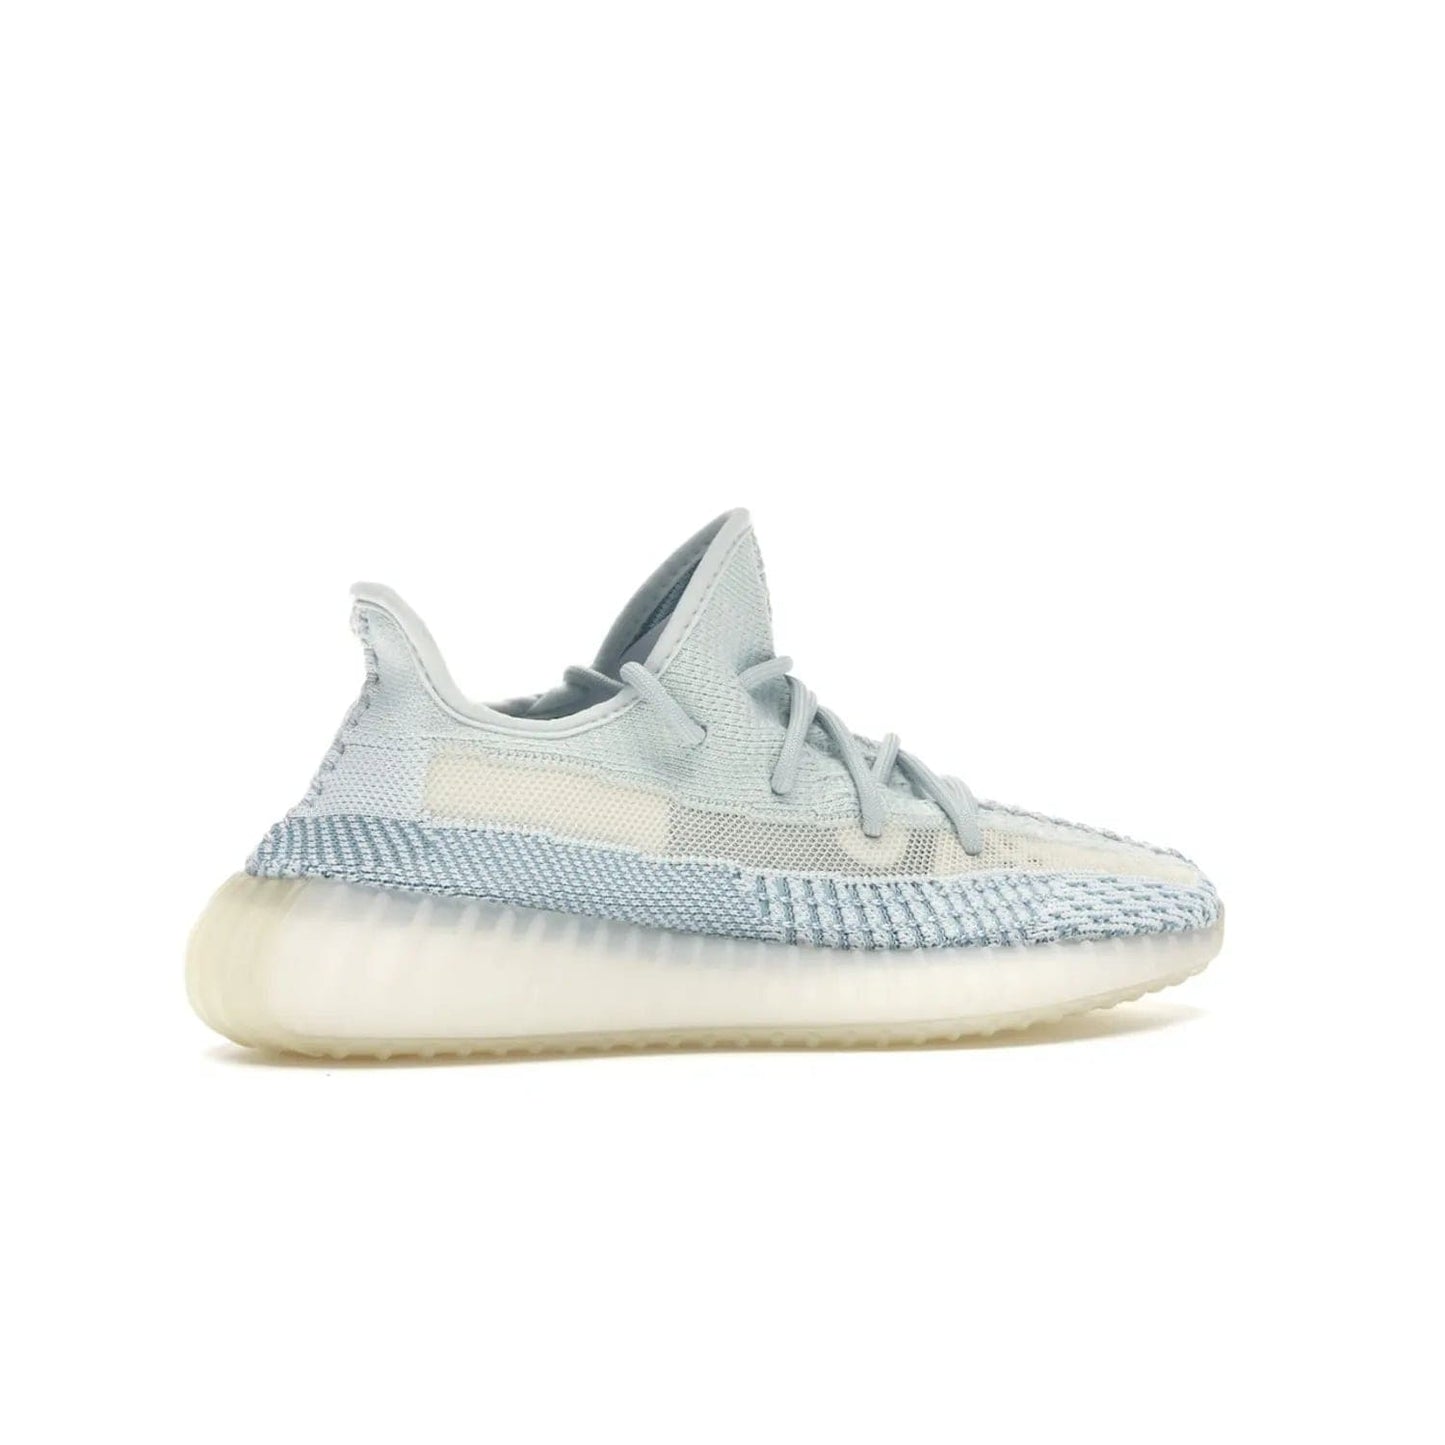 adidas Yeezy Boost 350 V2 Cloud White (Non-Reflective) - Image 35 - Only at www.BallersClubKickz.com - Uniquely designed adidas Yeezy Boost 350 V2 Cloud White (Non-Reflective) with a Primeknit upper in shades of cream and blue with a contrasting hard sole. A fashion-forward sneaker with a transparent strip and blue-and-white patterns.